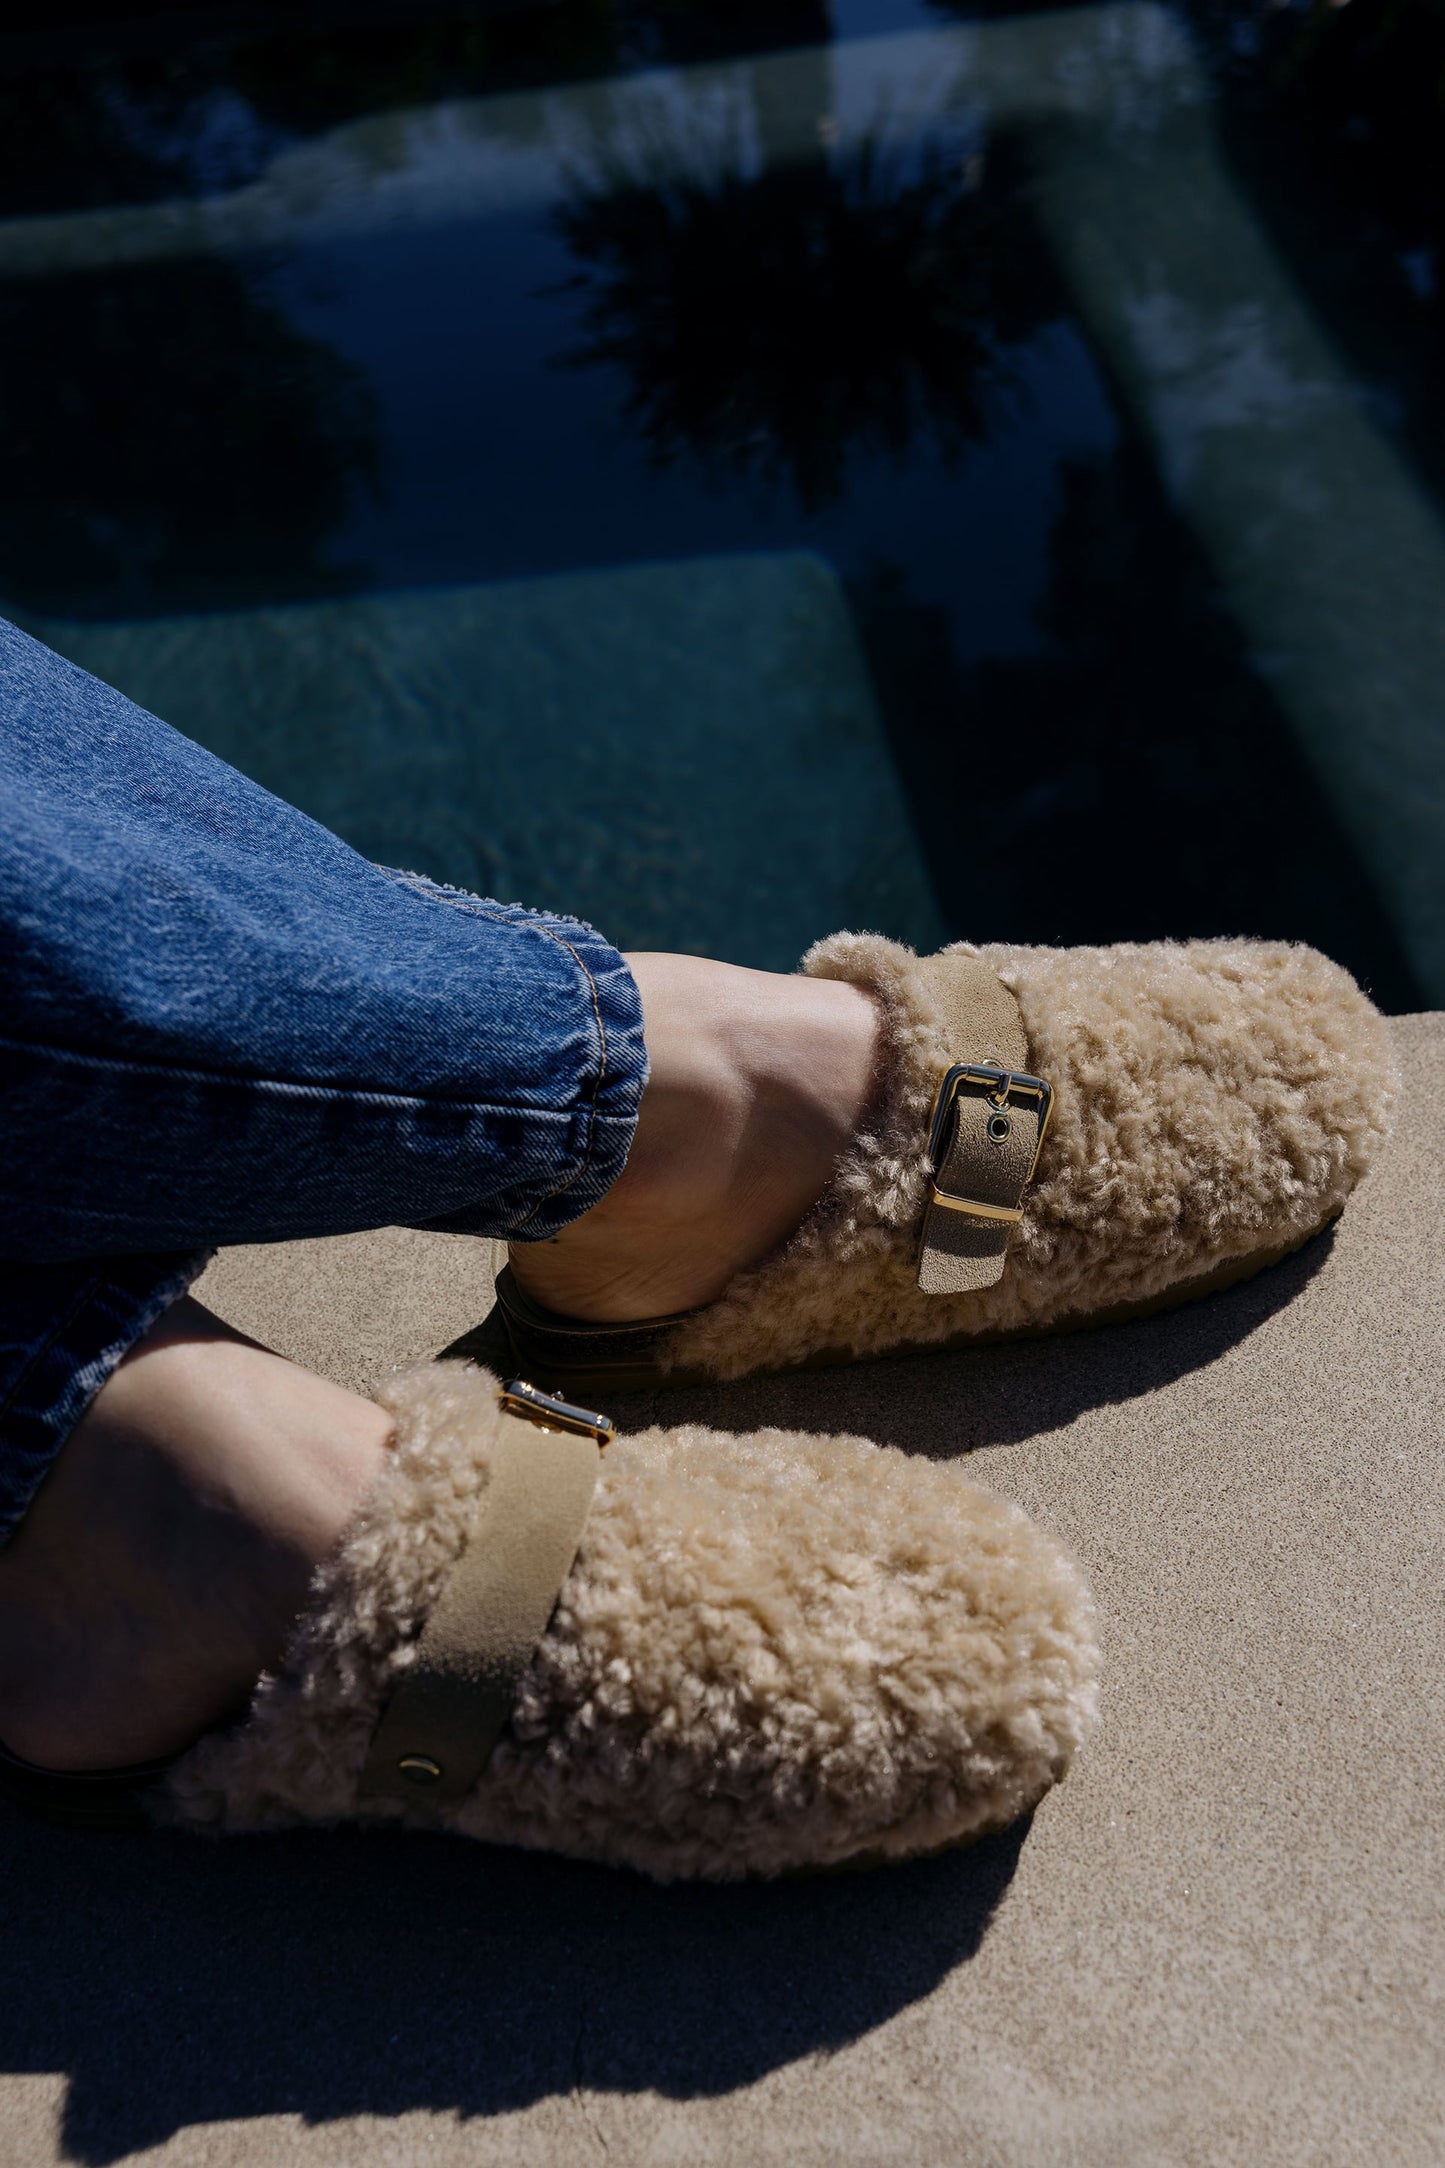 Faux shearling clog slippers